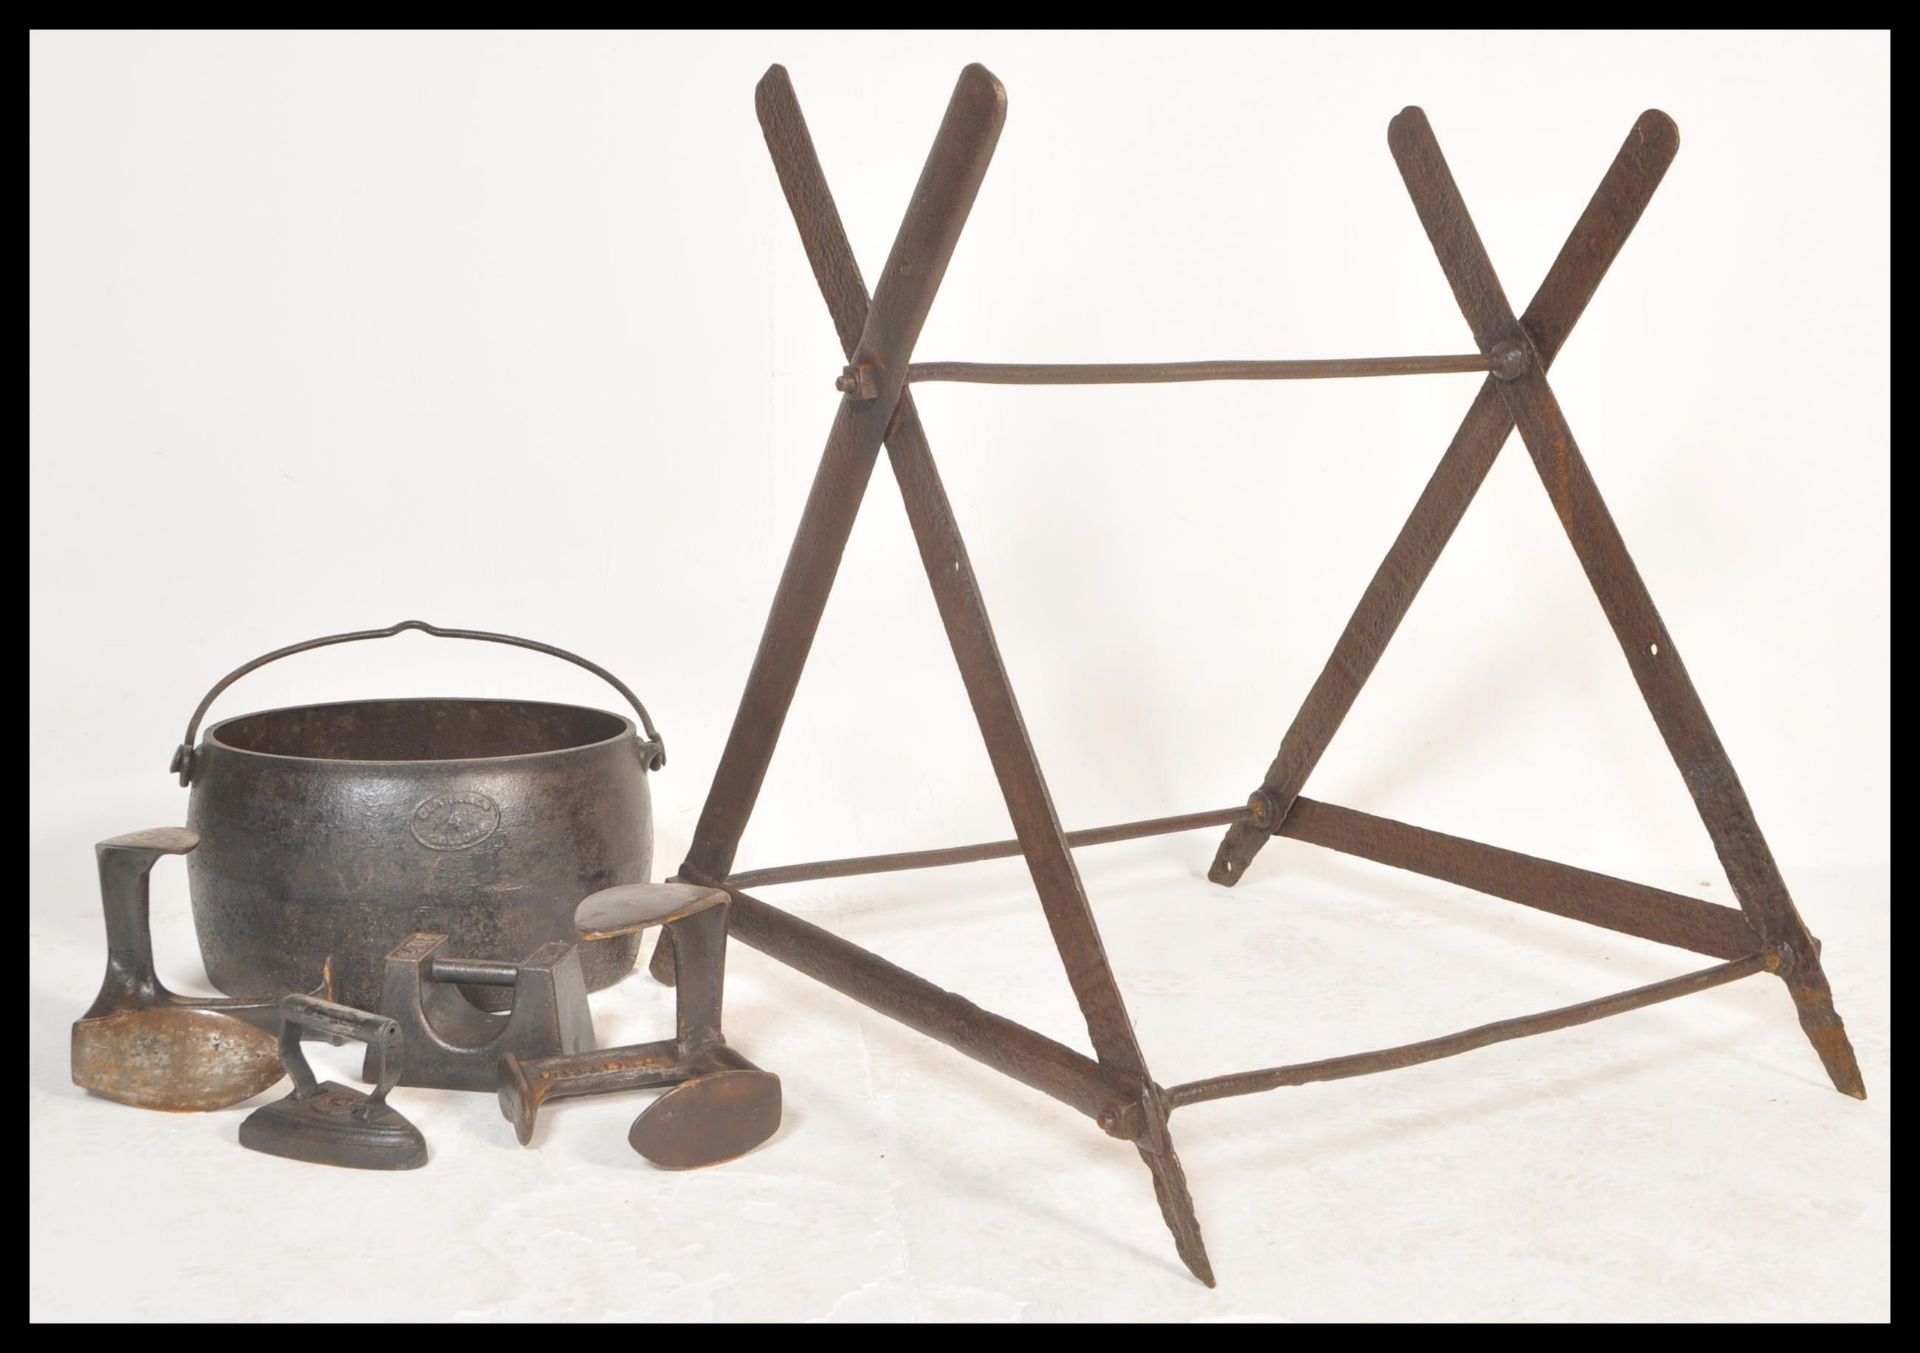 A vintage early 20th Century cast iron saw horse base together with a cast iron cooking pot and